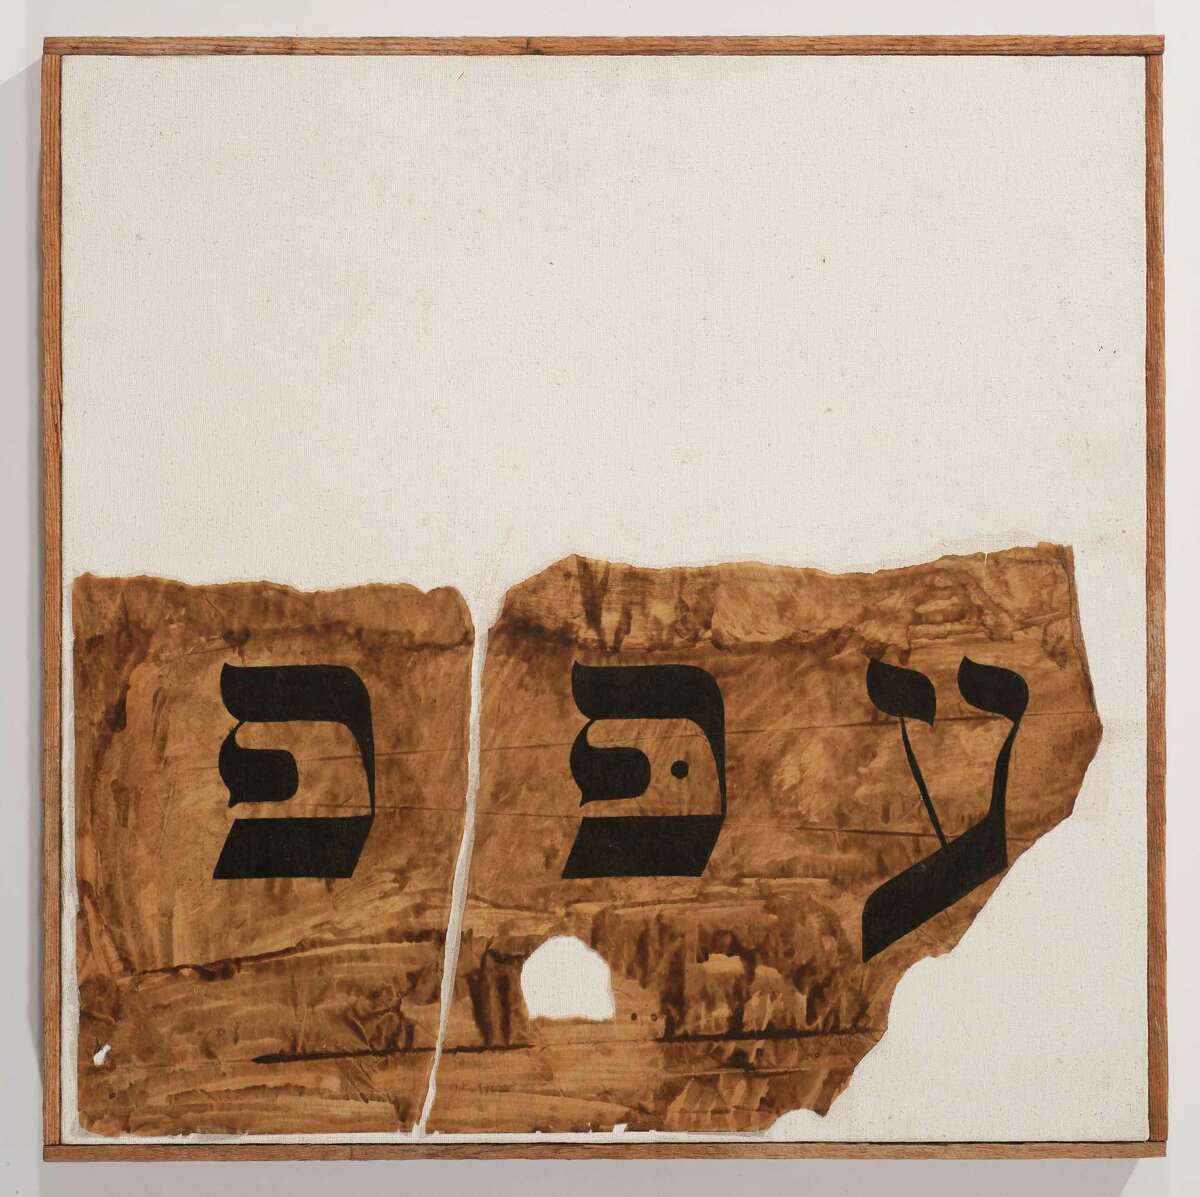 Wallace Berman, Untitled, 1956-1957. Ink and shellac on torn parchment paper on primed canvas, 19 1/2 Ã©?— 19 1/2 in. (49.5 Ã©?— 49.5 cm). The Menil Collection, Houston, Gift of Caroline Huber and the estate of Walter Hopps. Â The Estate of Wallace Berman